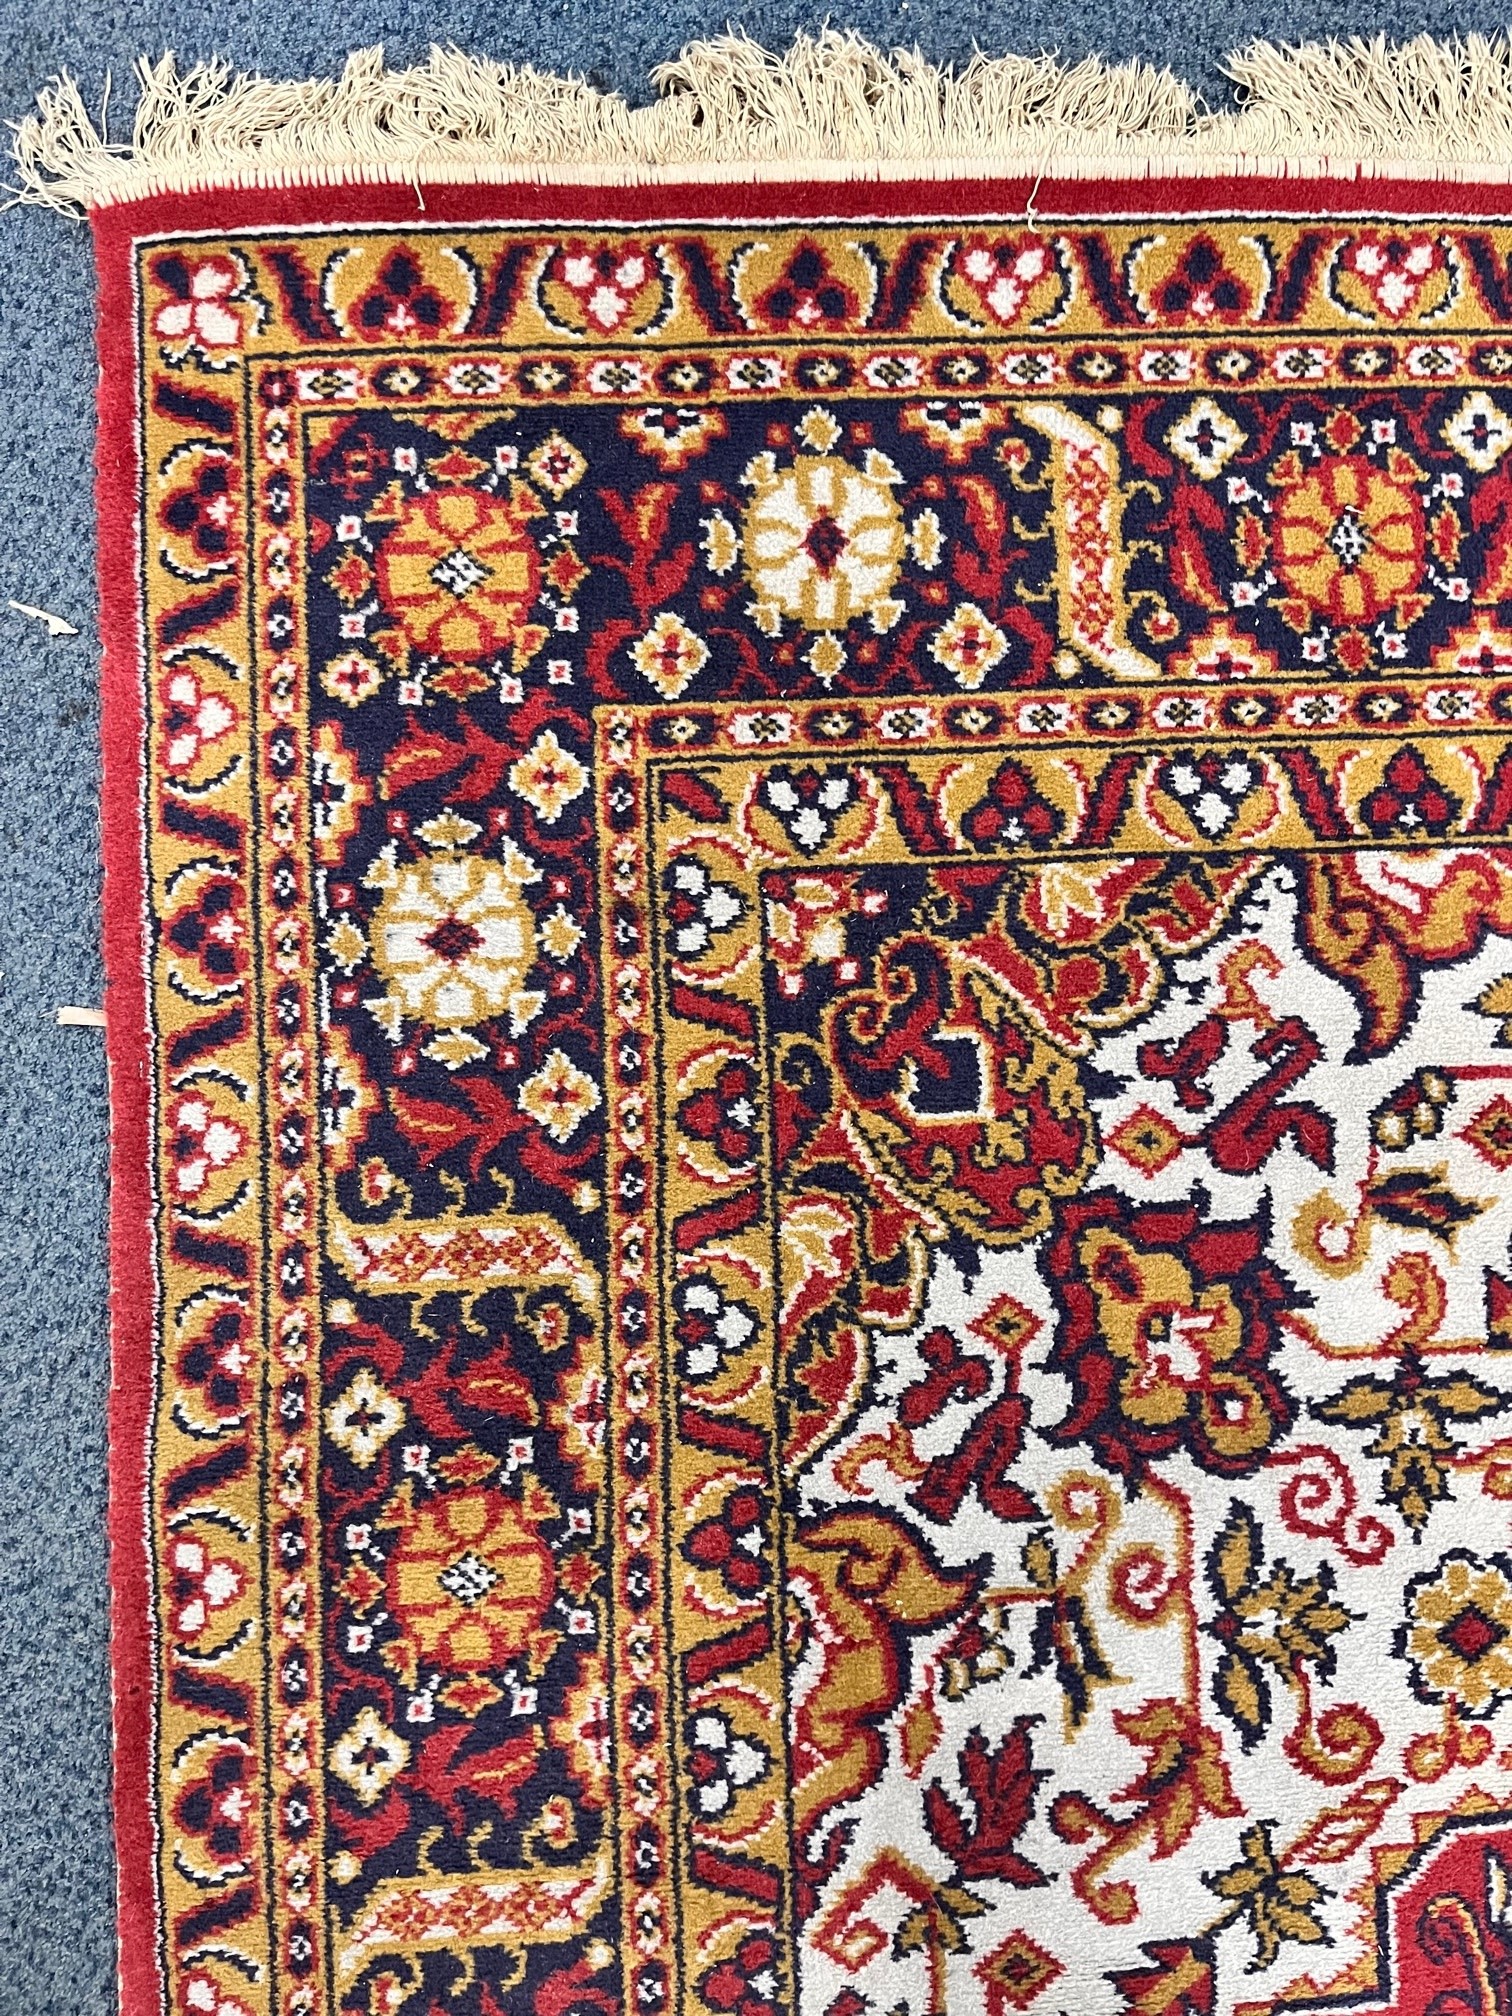 A LARGE WOOLLEN PERSIAN FLORAL PATTERNED RUG, with a red and cream field, 360cm x 250cm (condition - Image 2 of 3